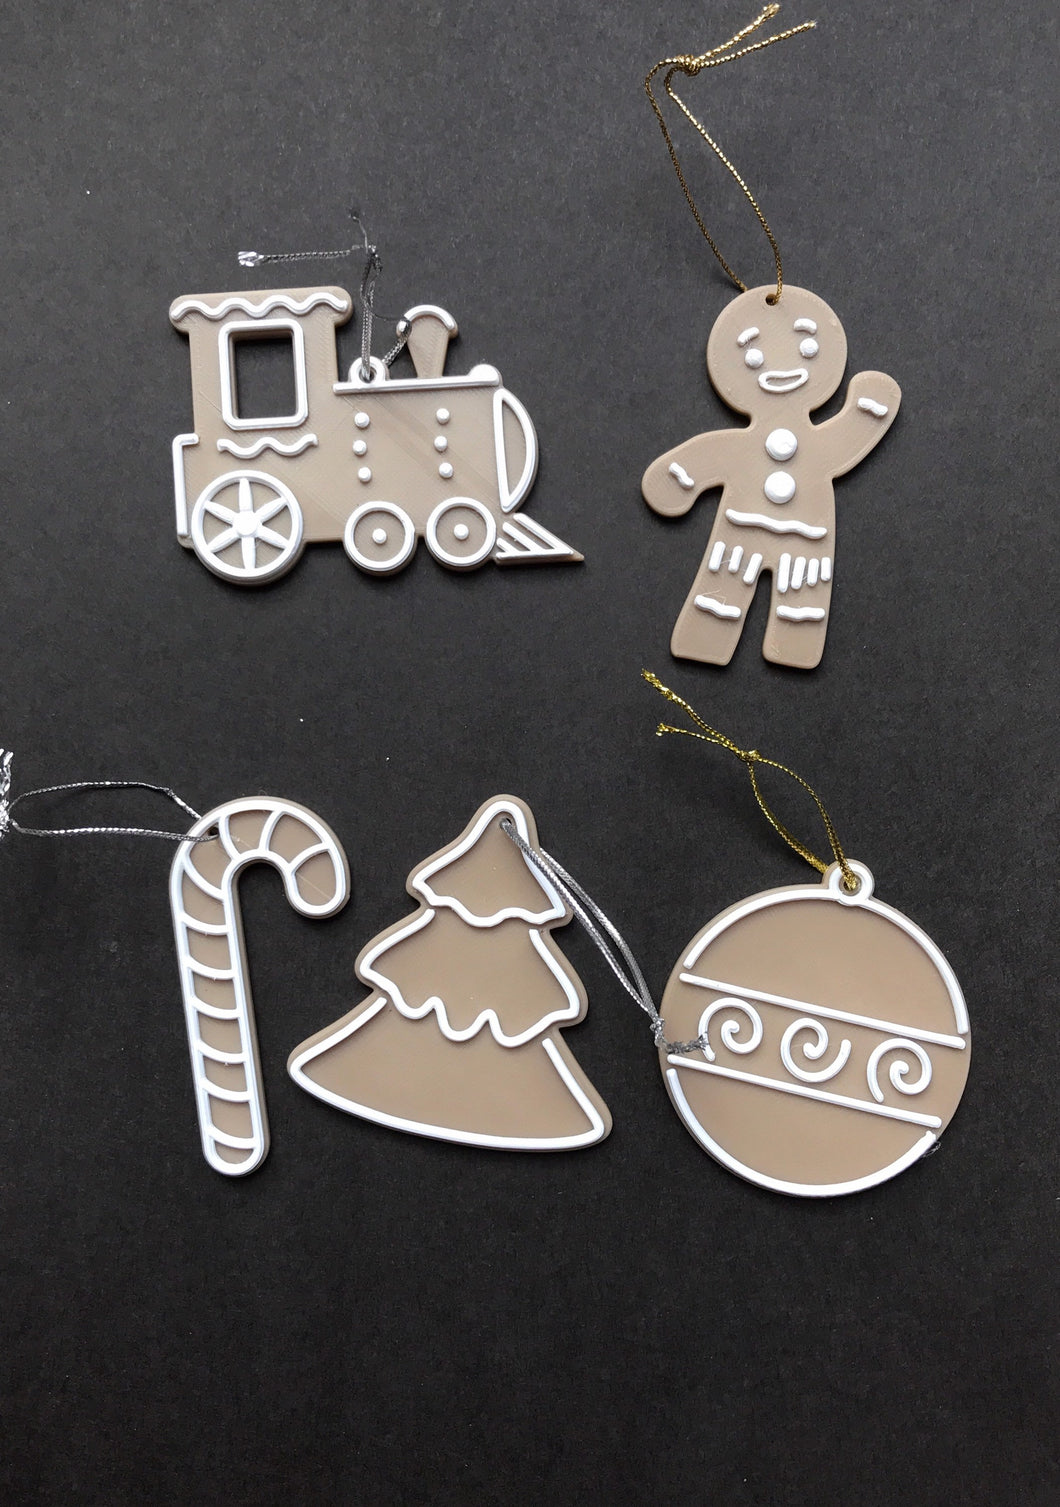 icing cookie christmas ornaments angel gingerbread man house tree train star sock bauble candy cane  pack of 5 - choice 1